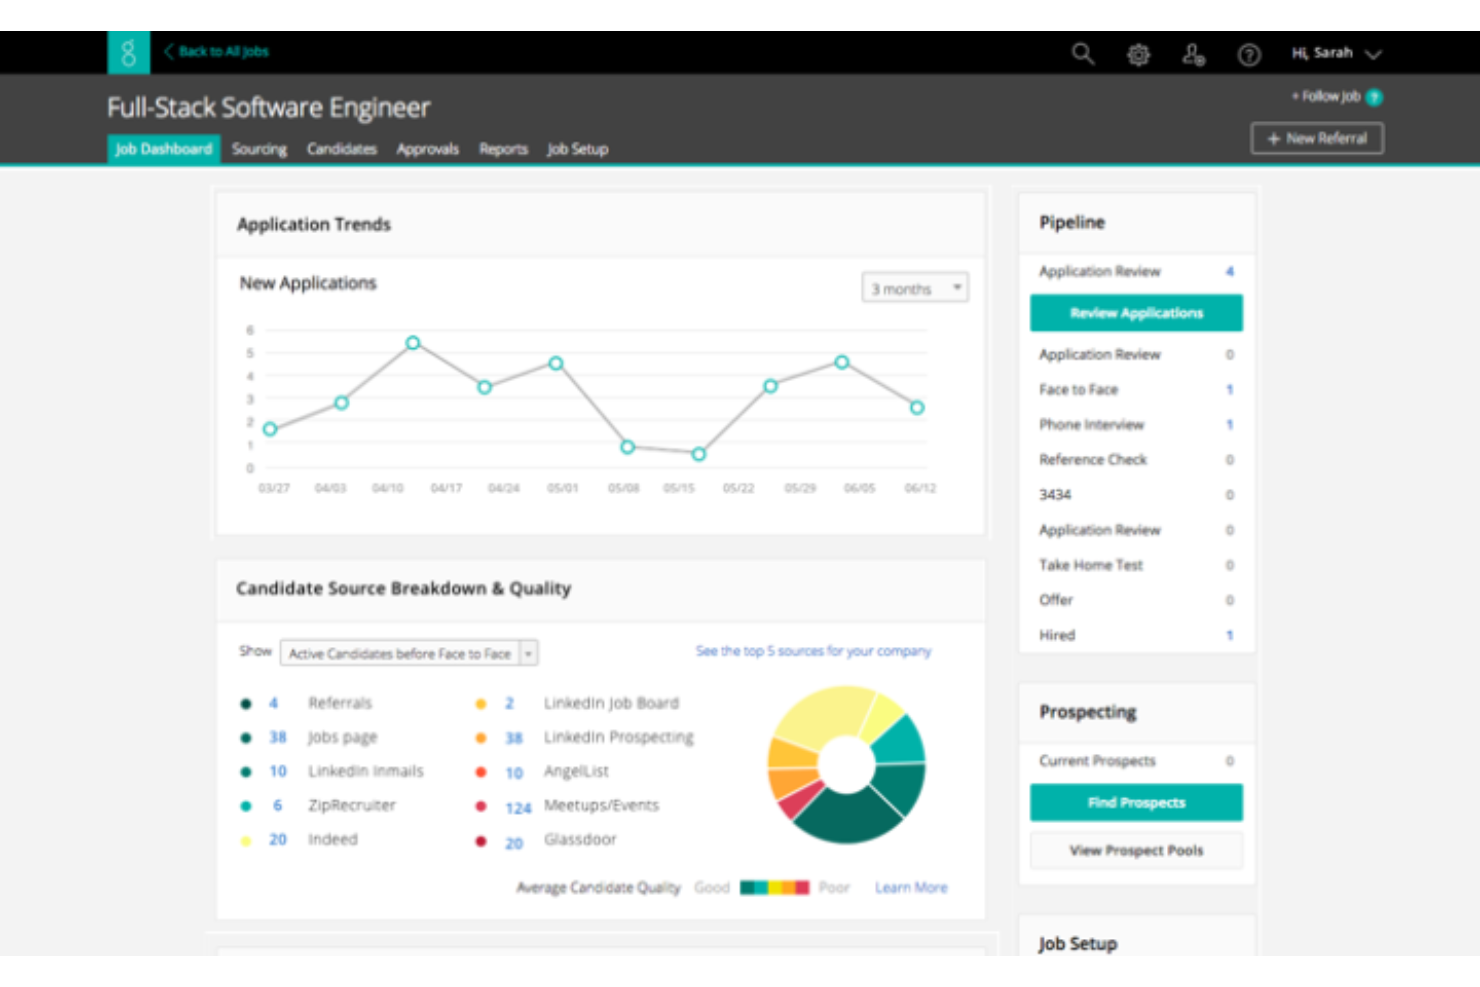 Easy Applicant Tracking Software for Small Businesses